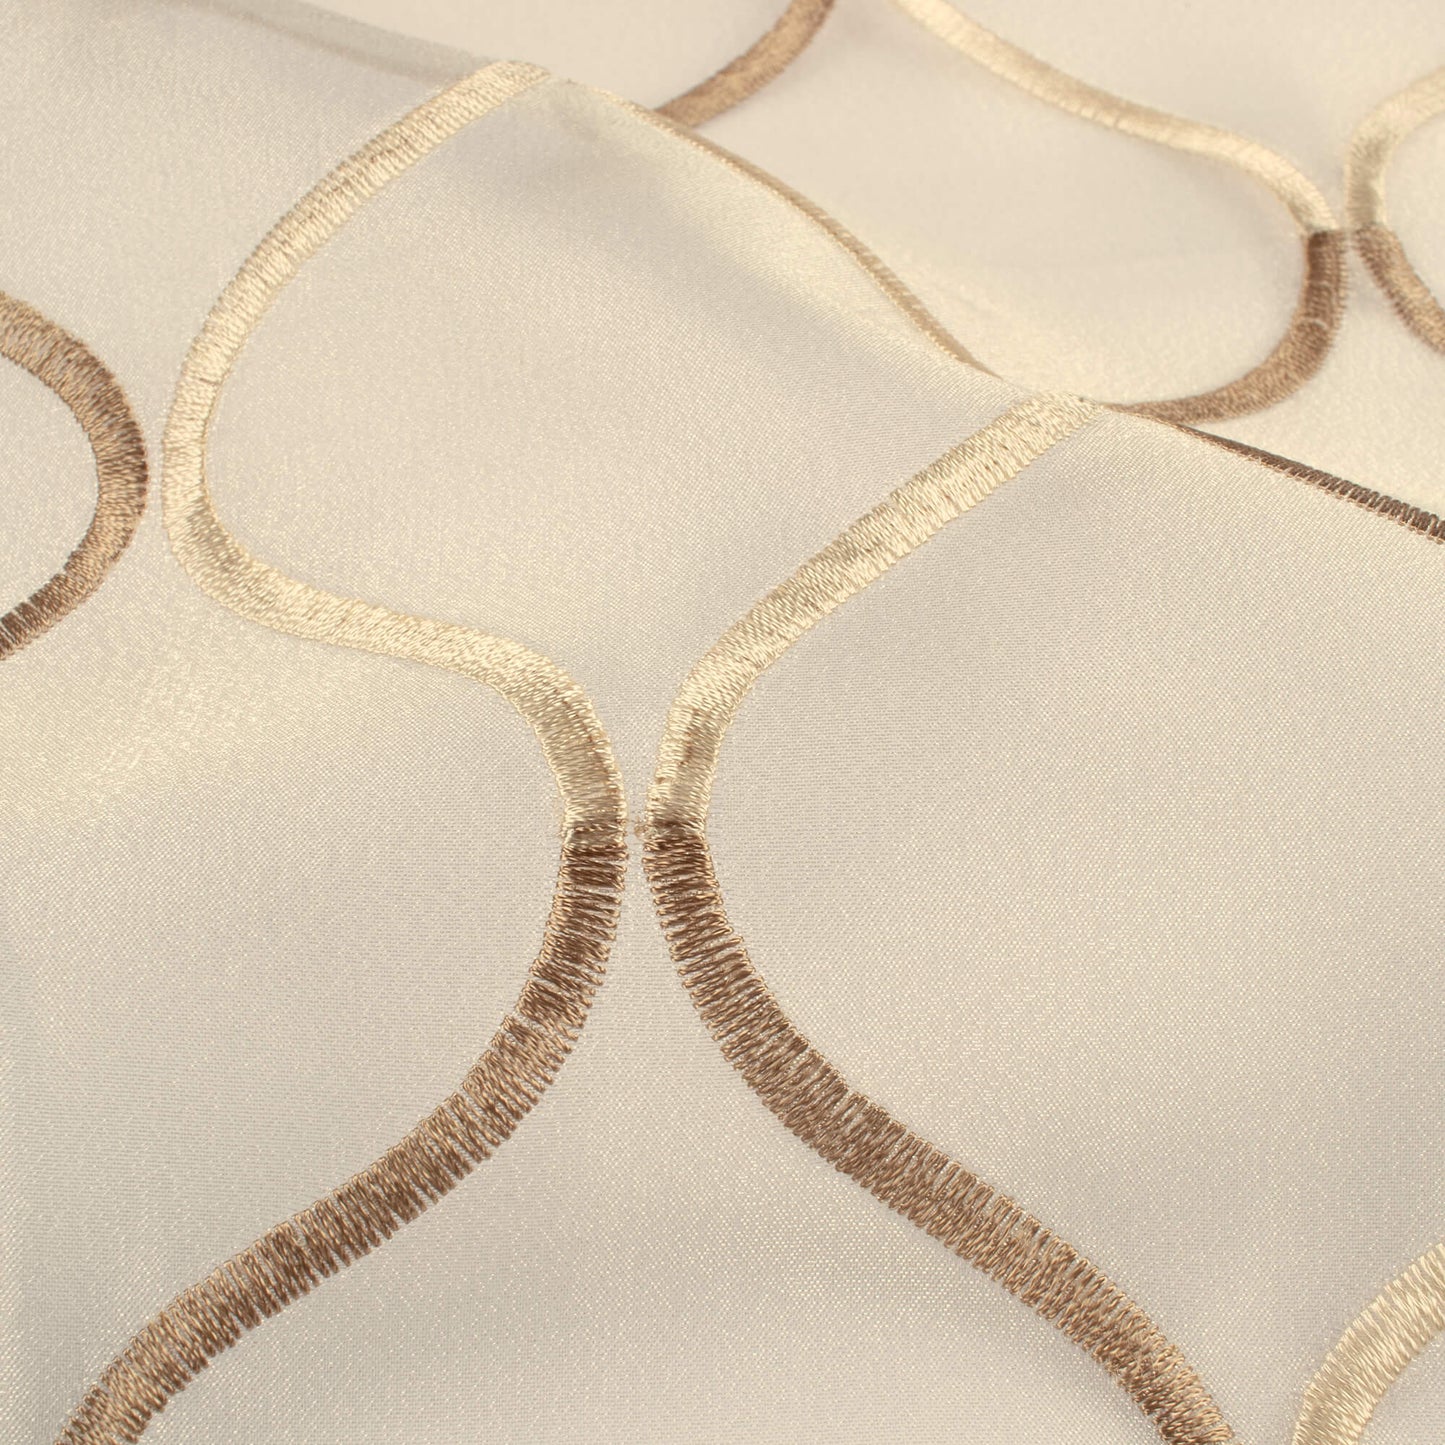 Oatmeal Beige And Tan Brown Trellis Pattern Embroidery Organza Tissue Premium Sheer Fabric (Width 48 Inches)